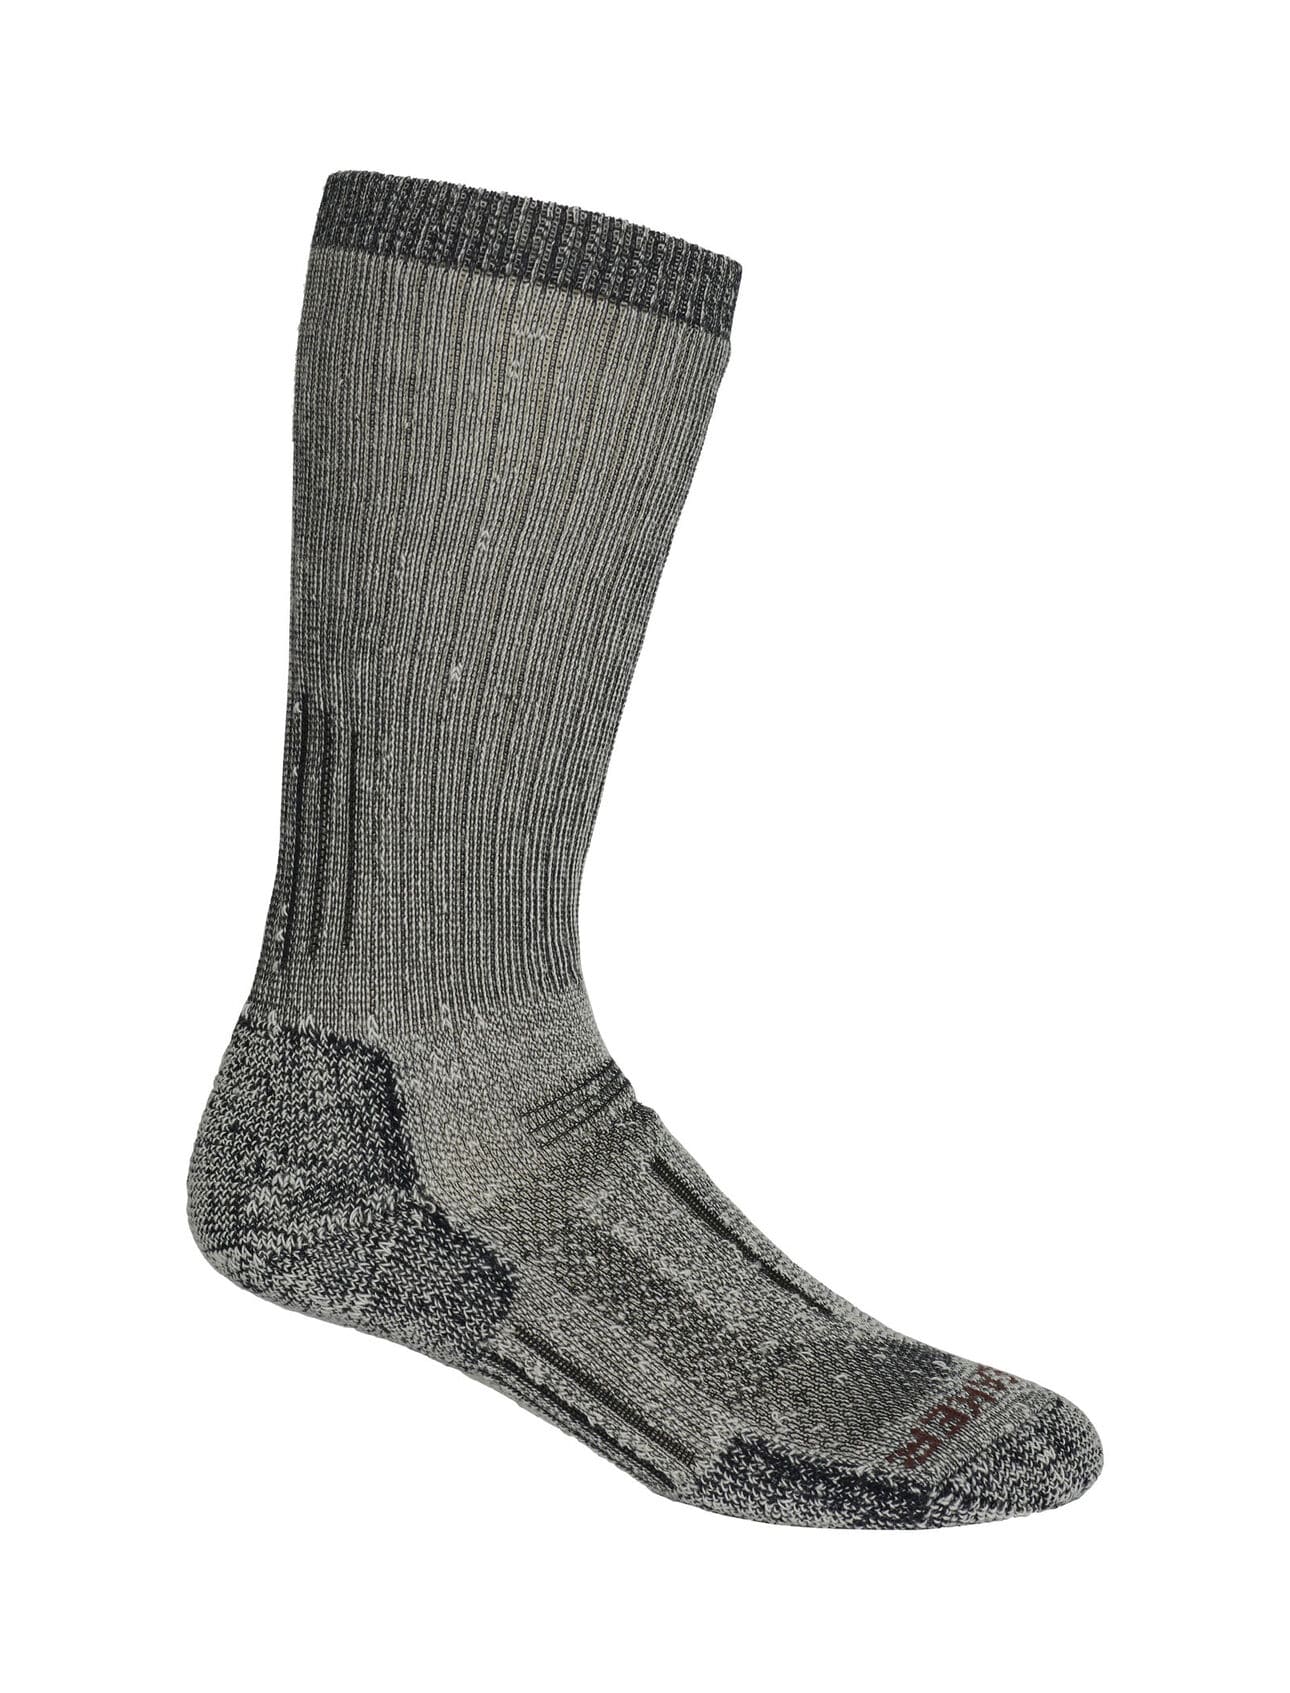 CHAUSSETTES MS MONTR MID CALF - ICEBREAKER - 1361/JETHTHR EXPRESS